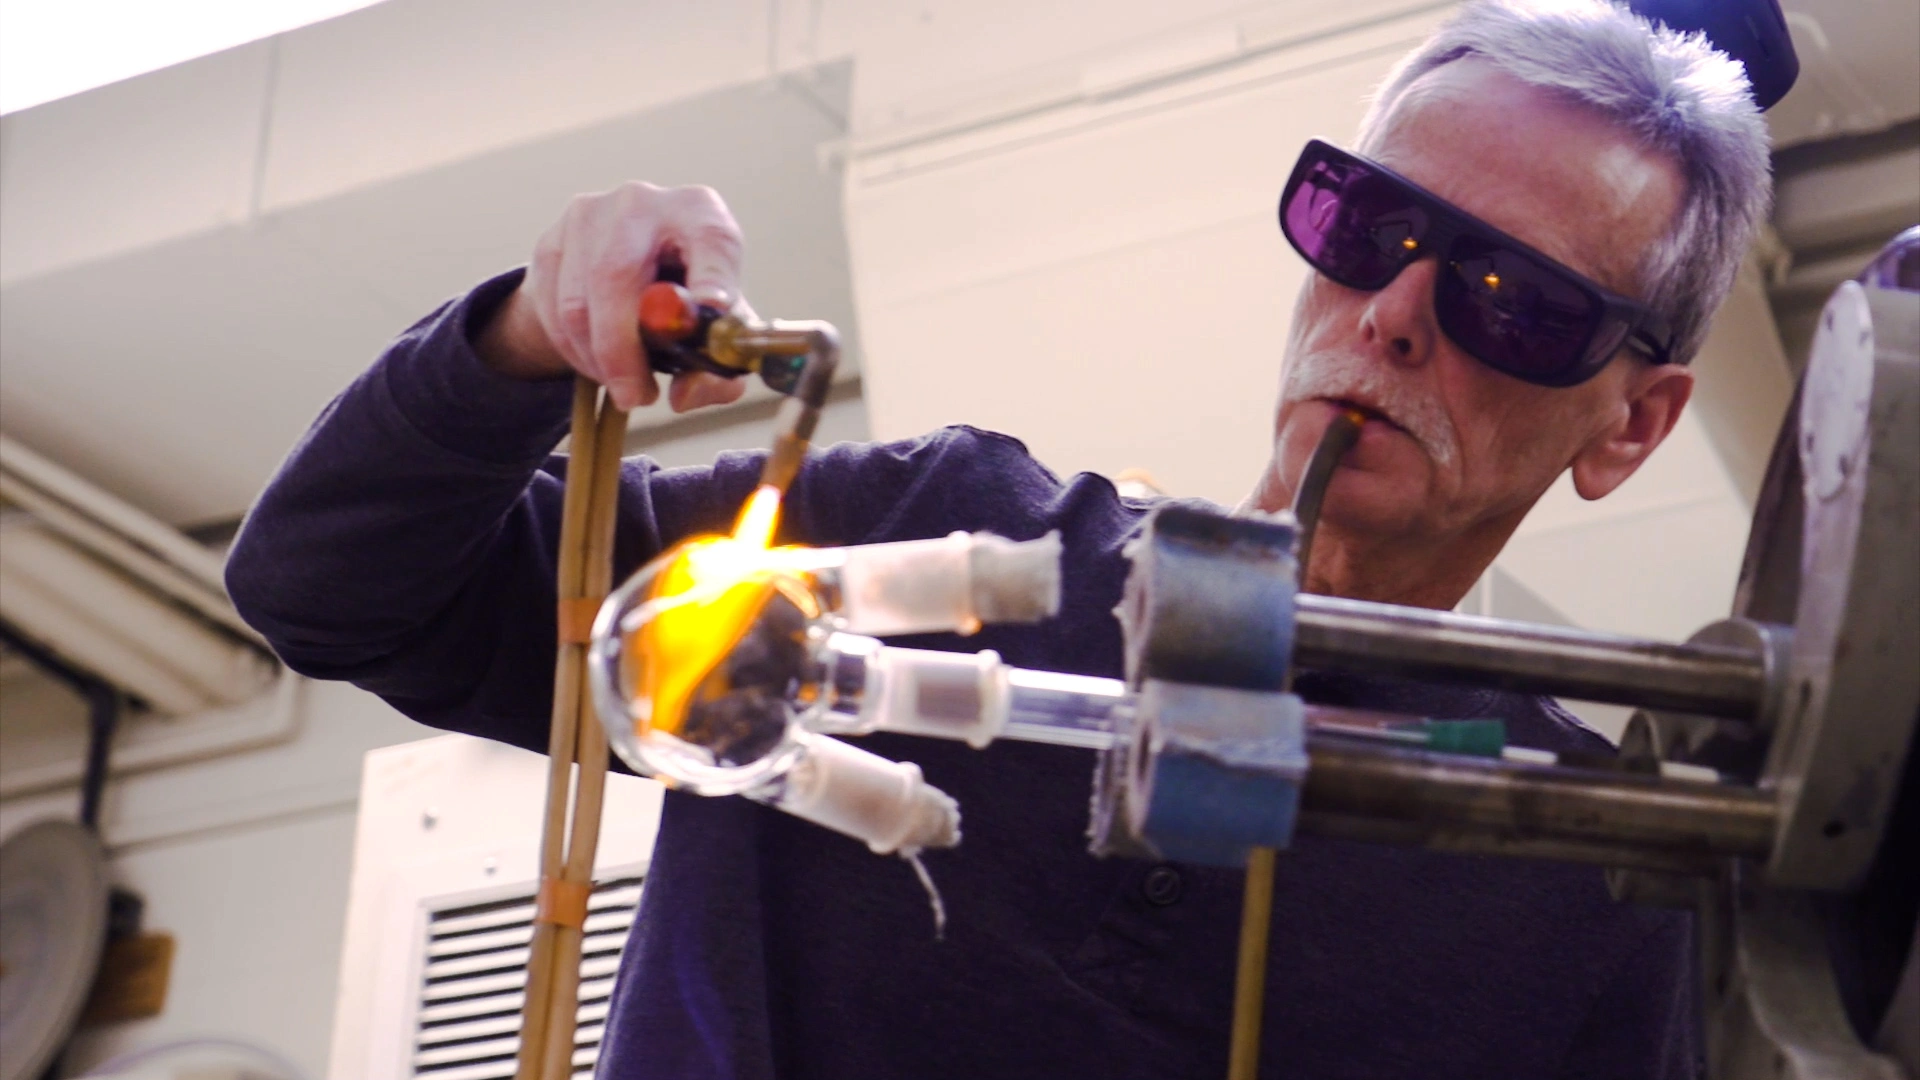 A man with safety glasses fabricating glass